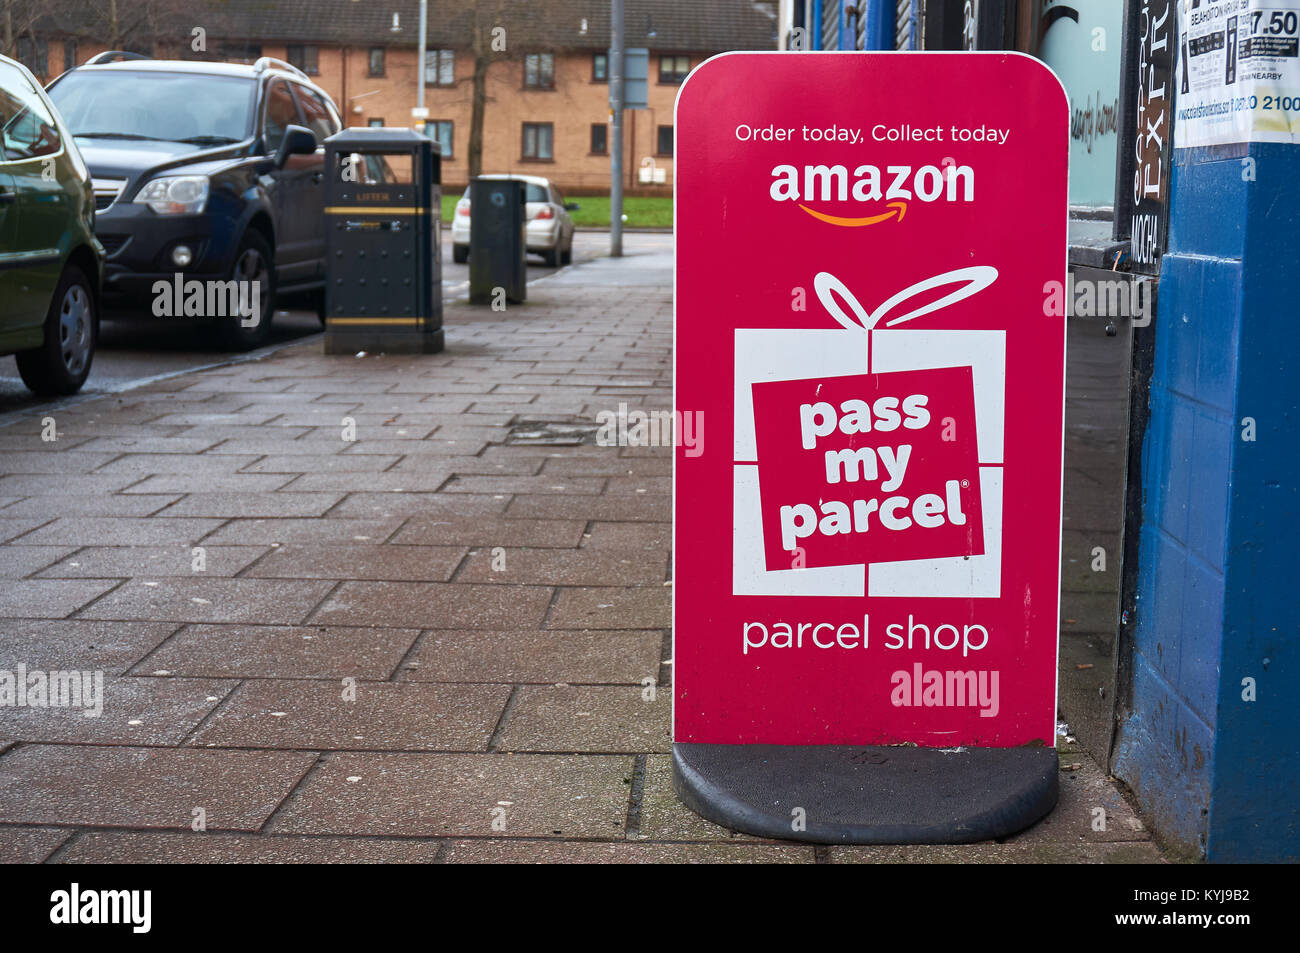 Amazon pass my parcel pink banner ad in front of a local newsagent acting as parcel shop. Stock Photo